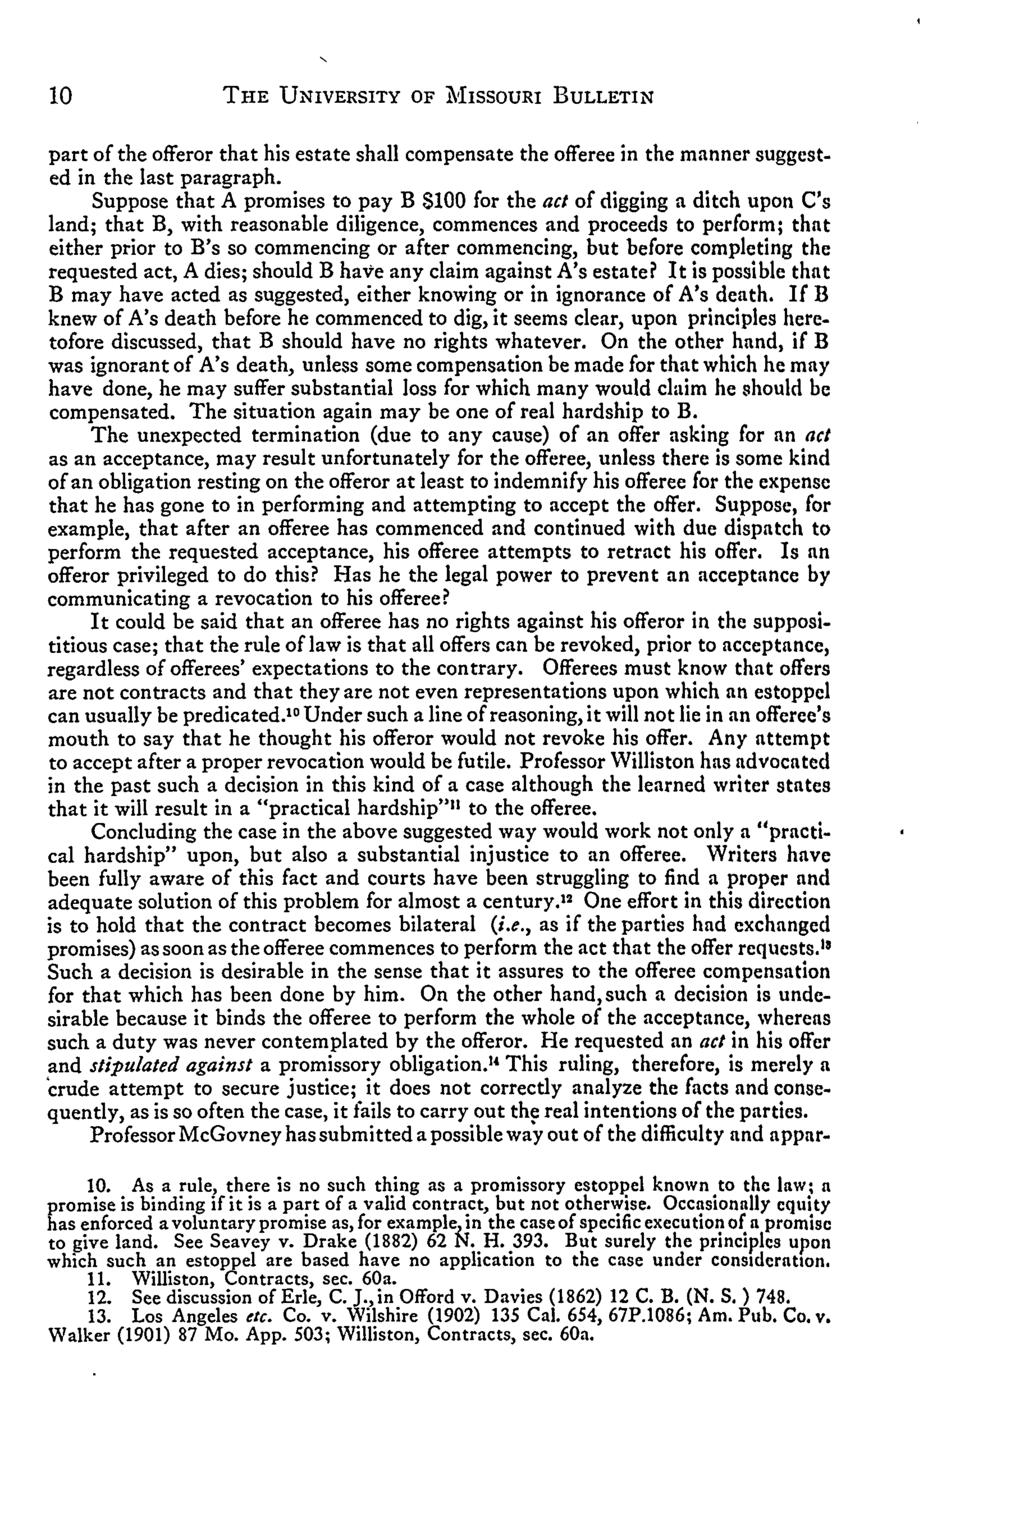 THE UNIVERSITY OF AMISSOURI BULLETIN part of the offeror that his estate shall compensate the offeree in the manner suggested in the last paragraph.